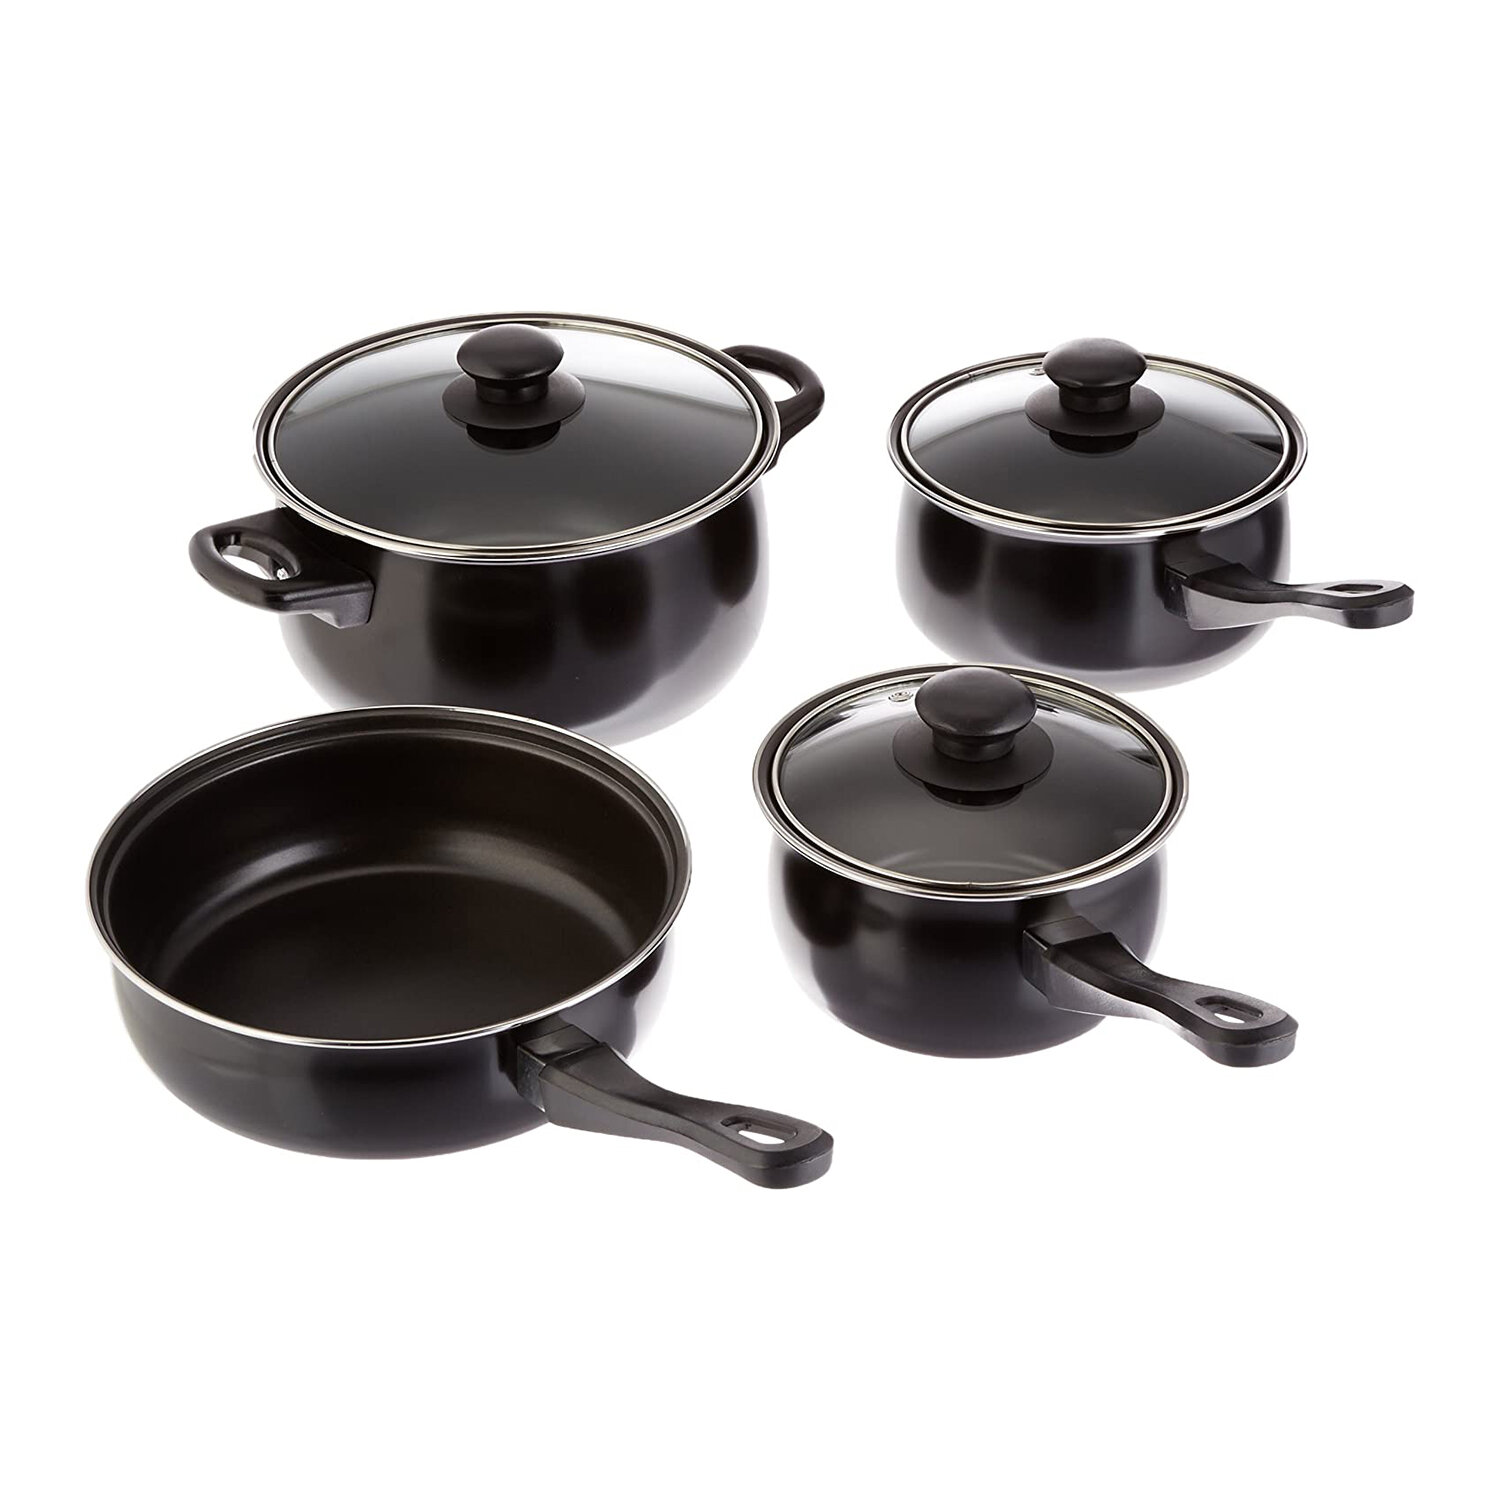 Serenelife 6-Piece Set Pots and Pans Basic Kitchen Cookware, Black Non-Stick Coating Inside, Gray